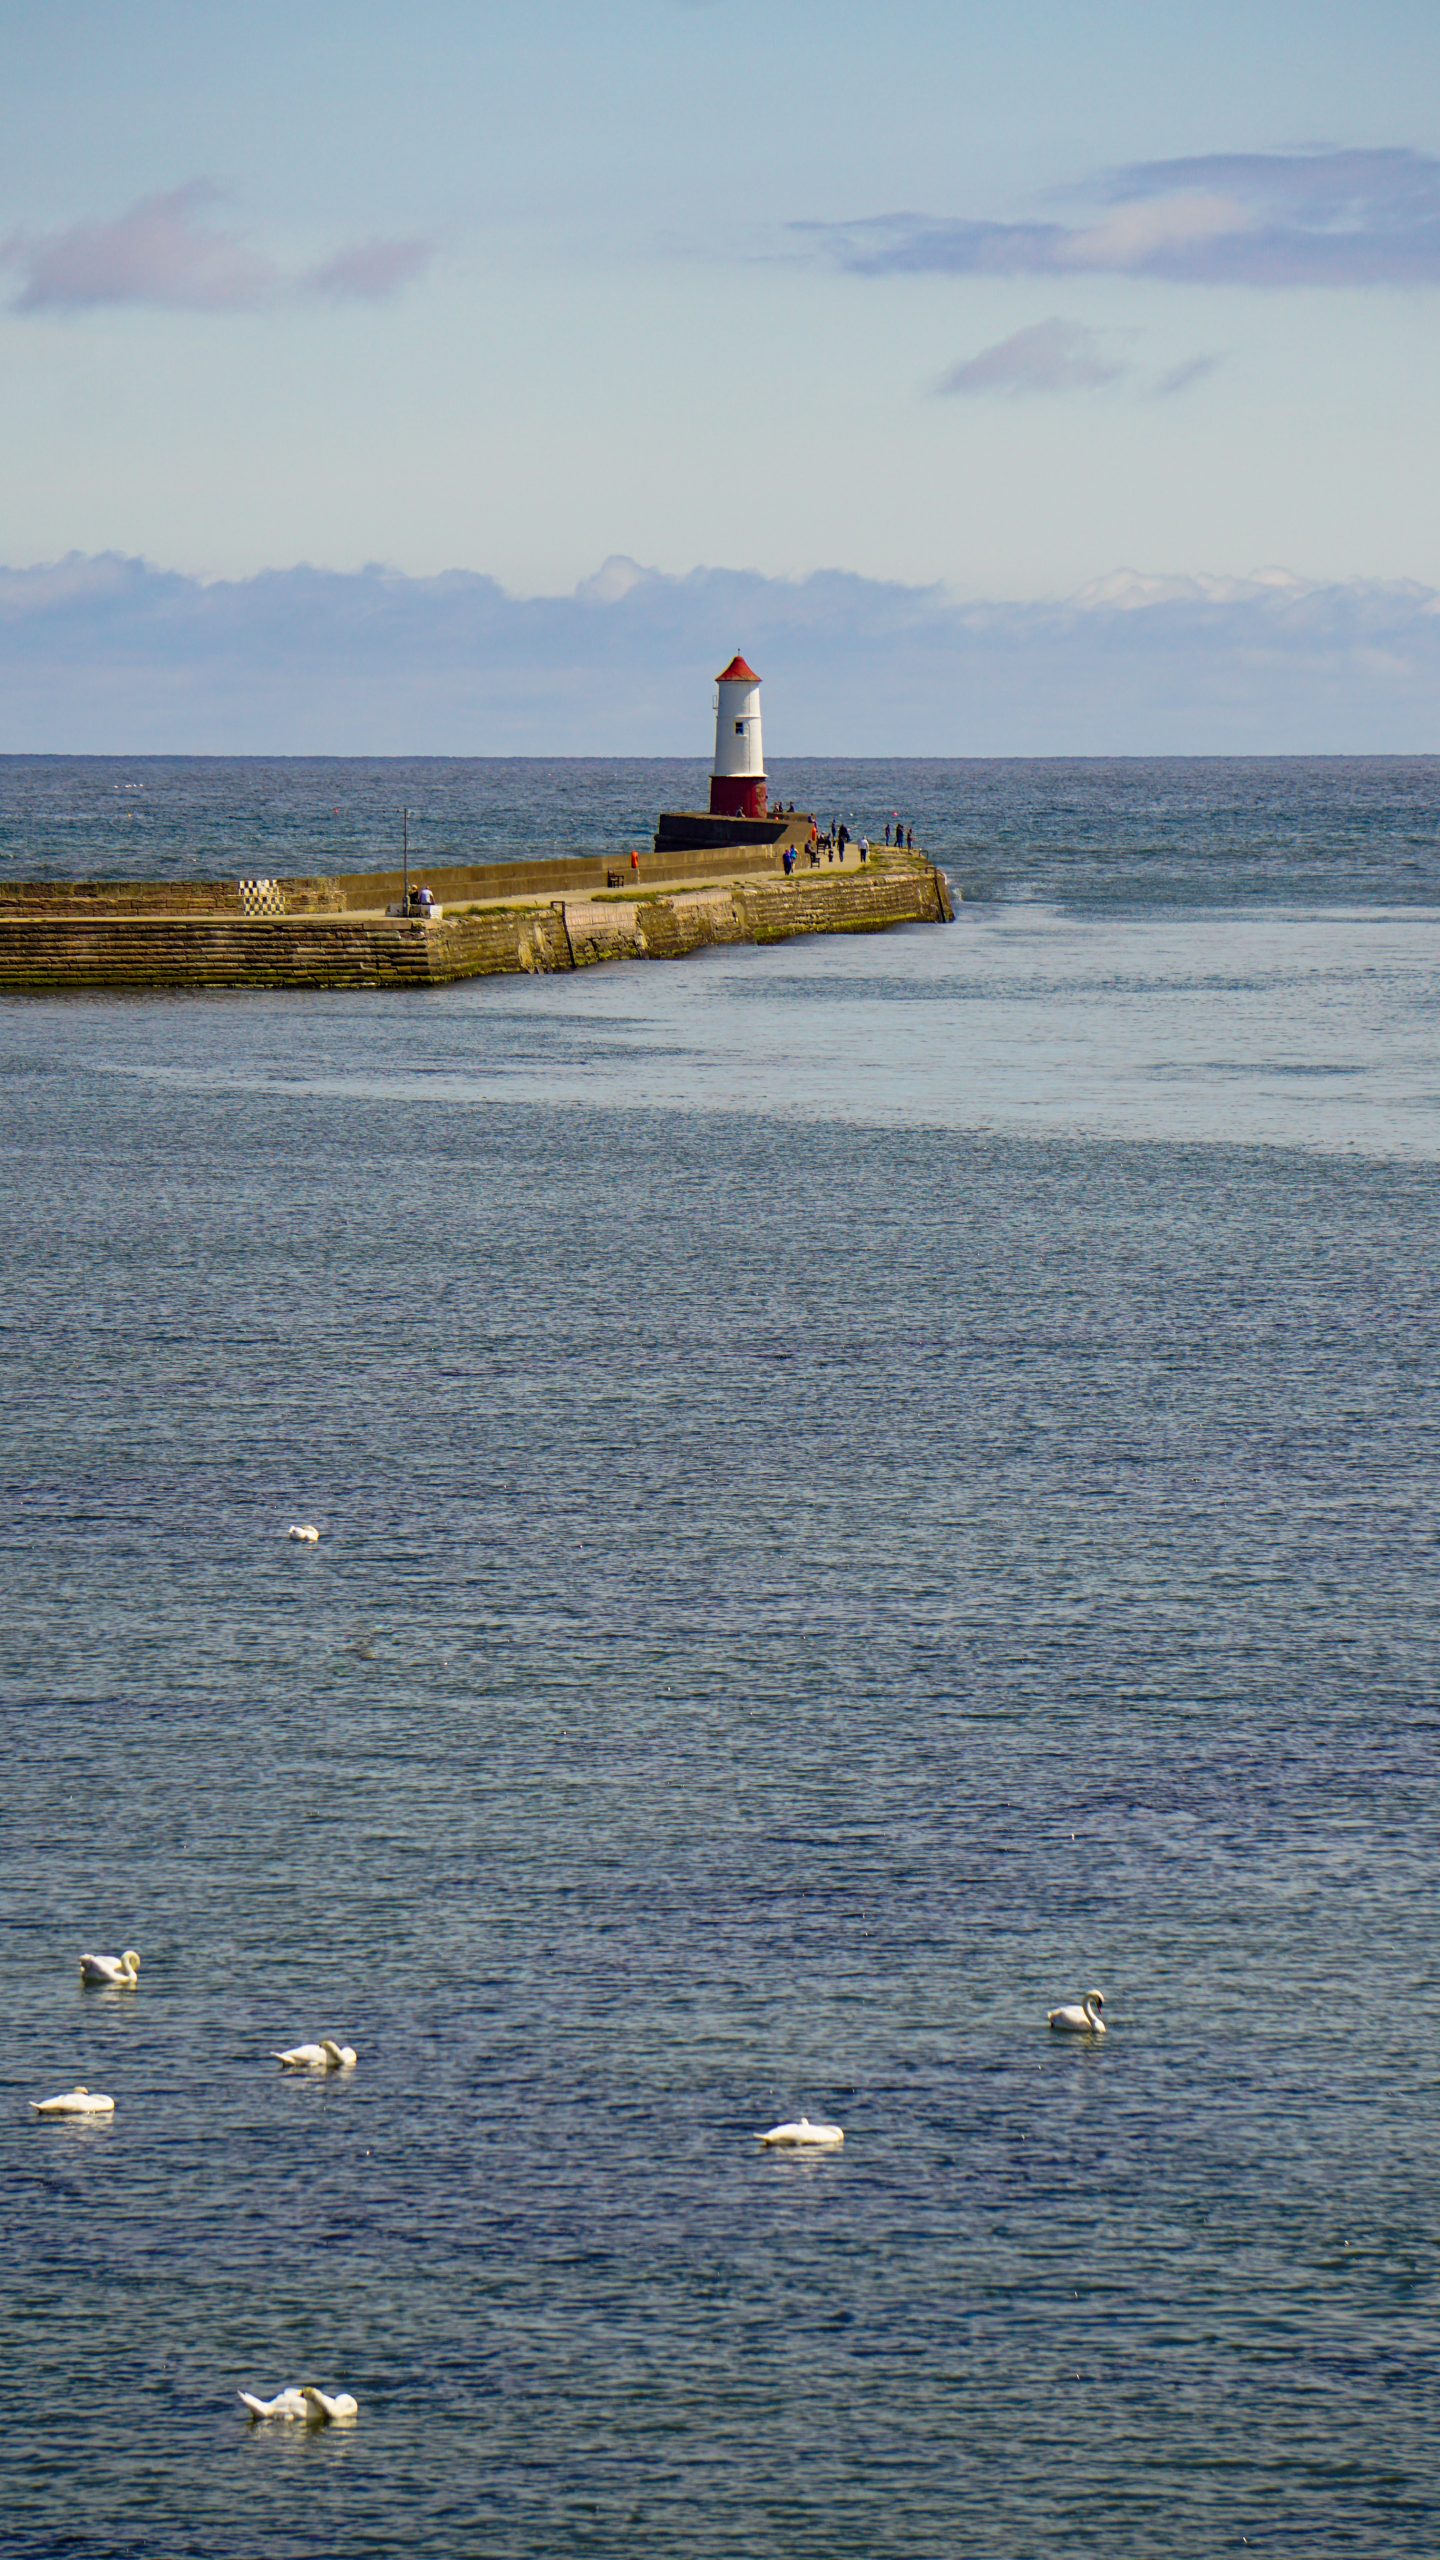 The Lighthouse from the walls